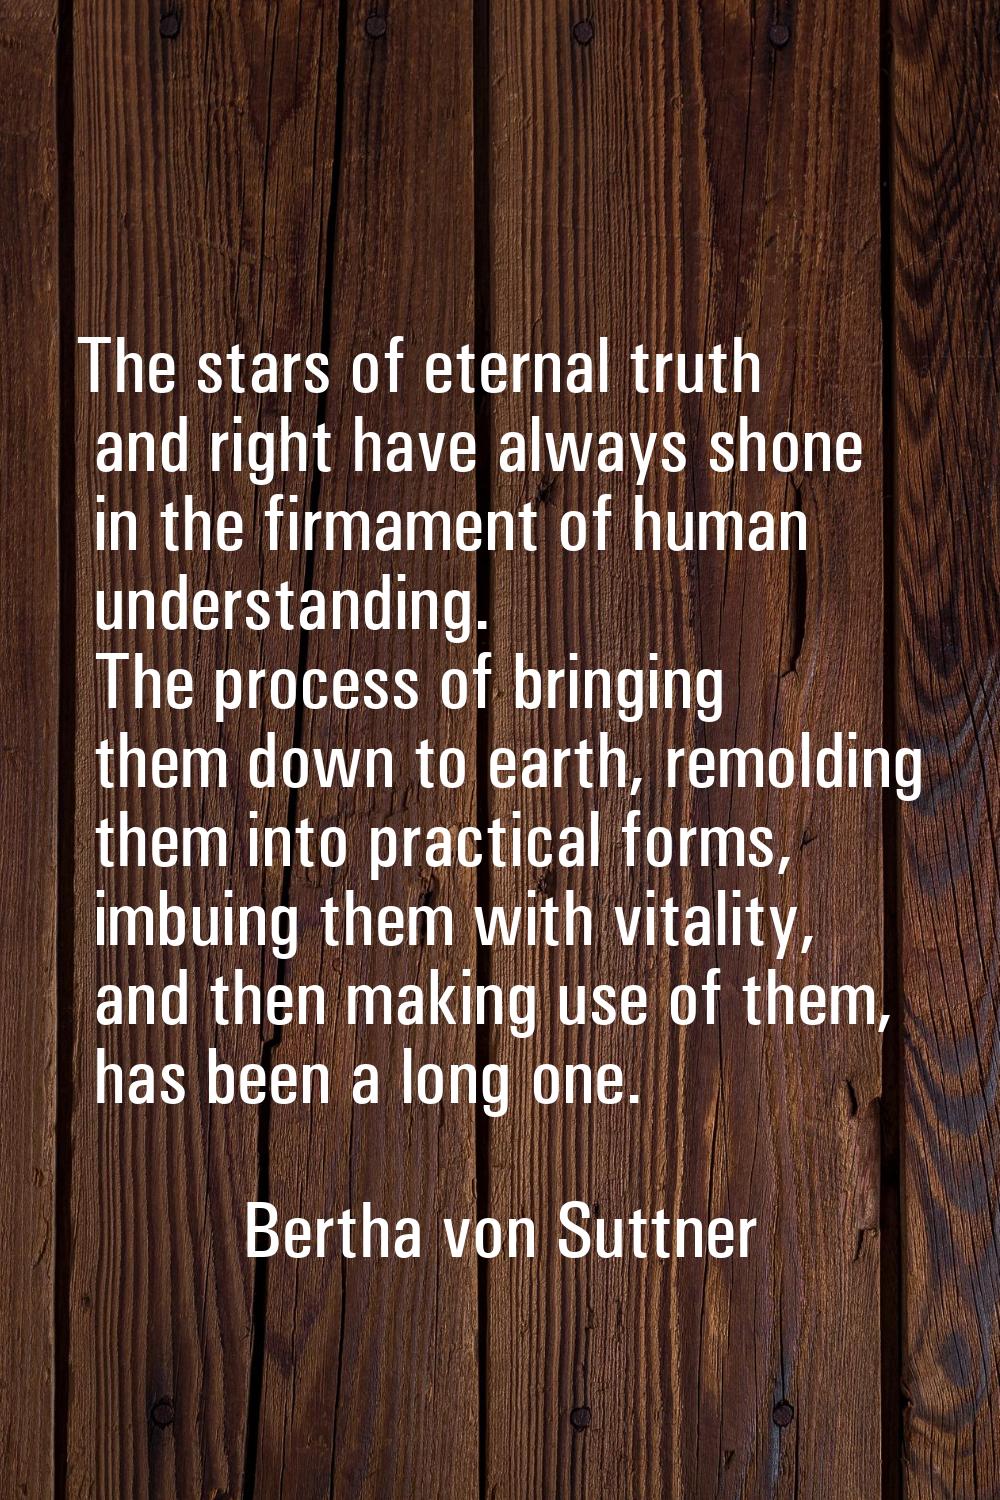 The stars of eternal truth and right have always shone in the firmament of human understanding. The